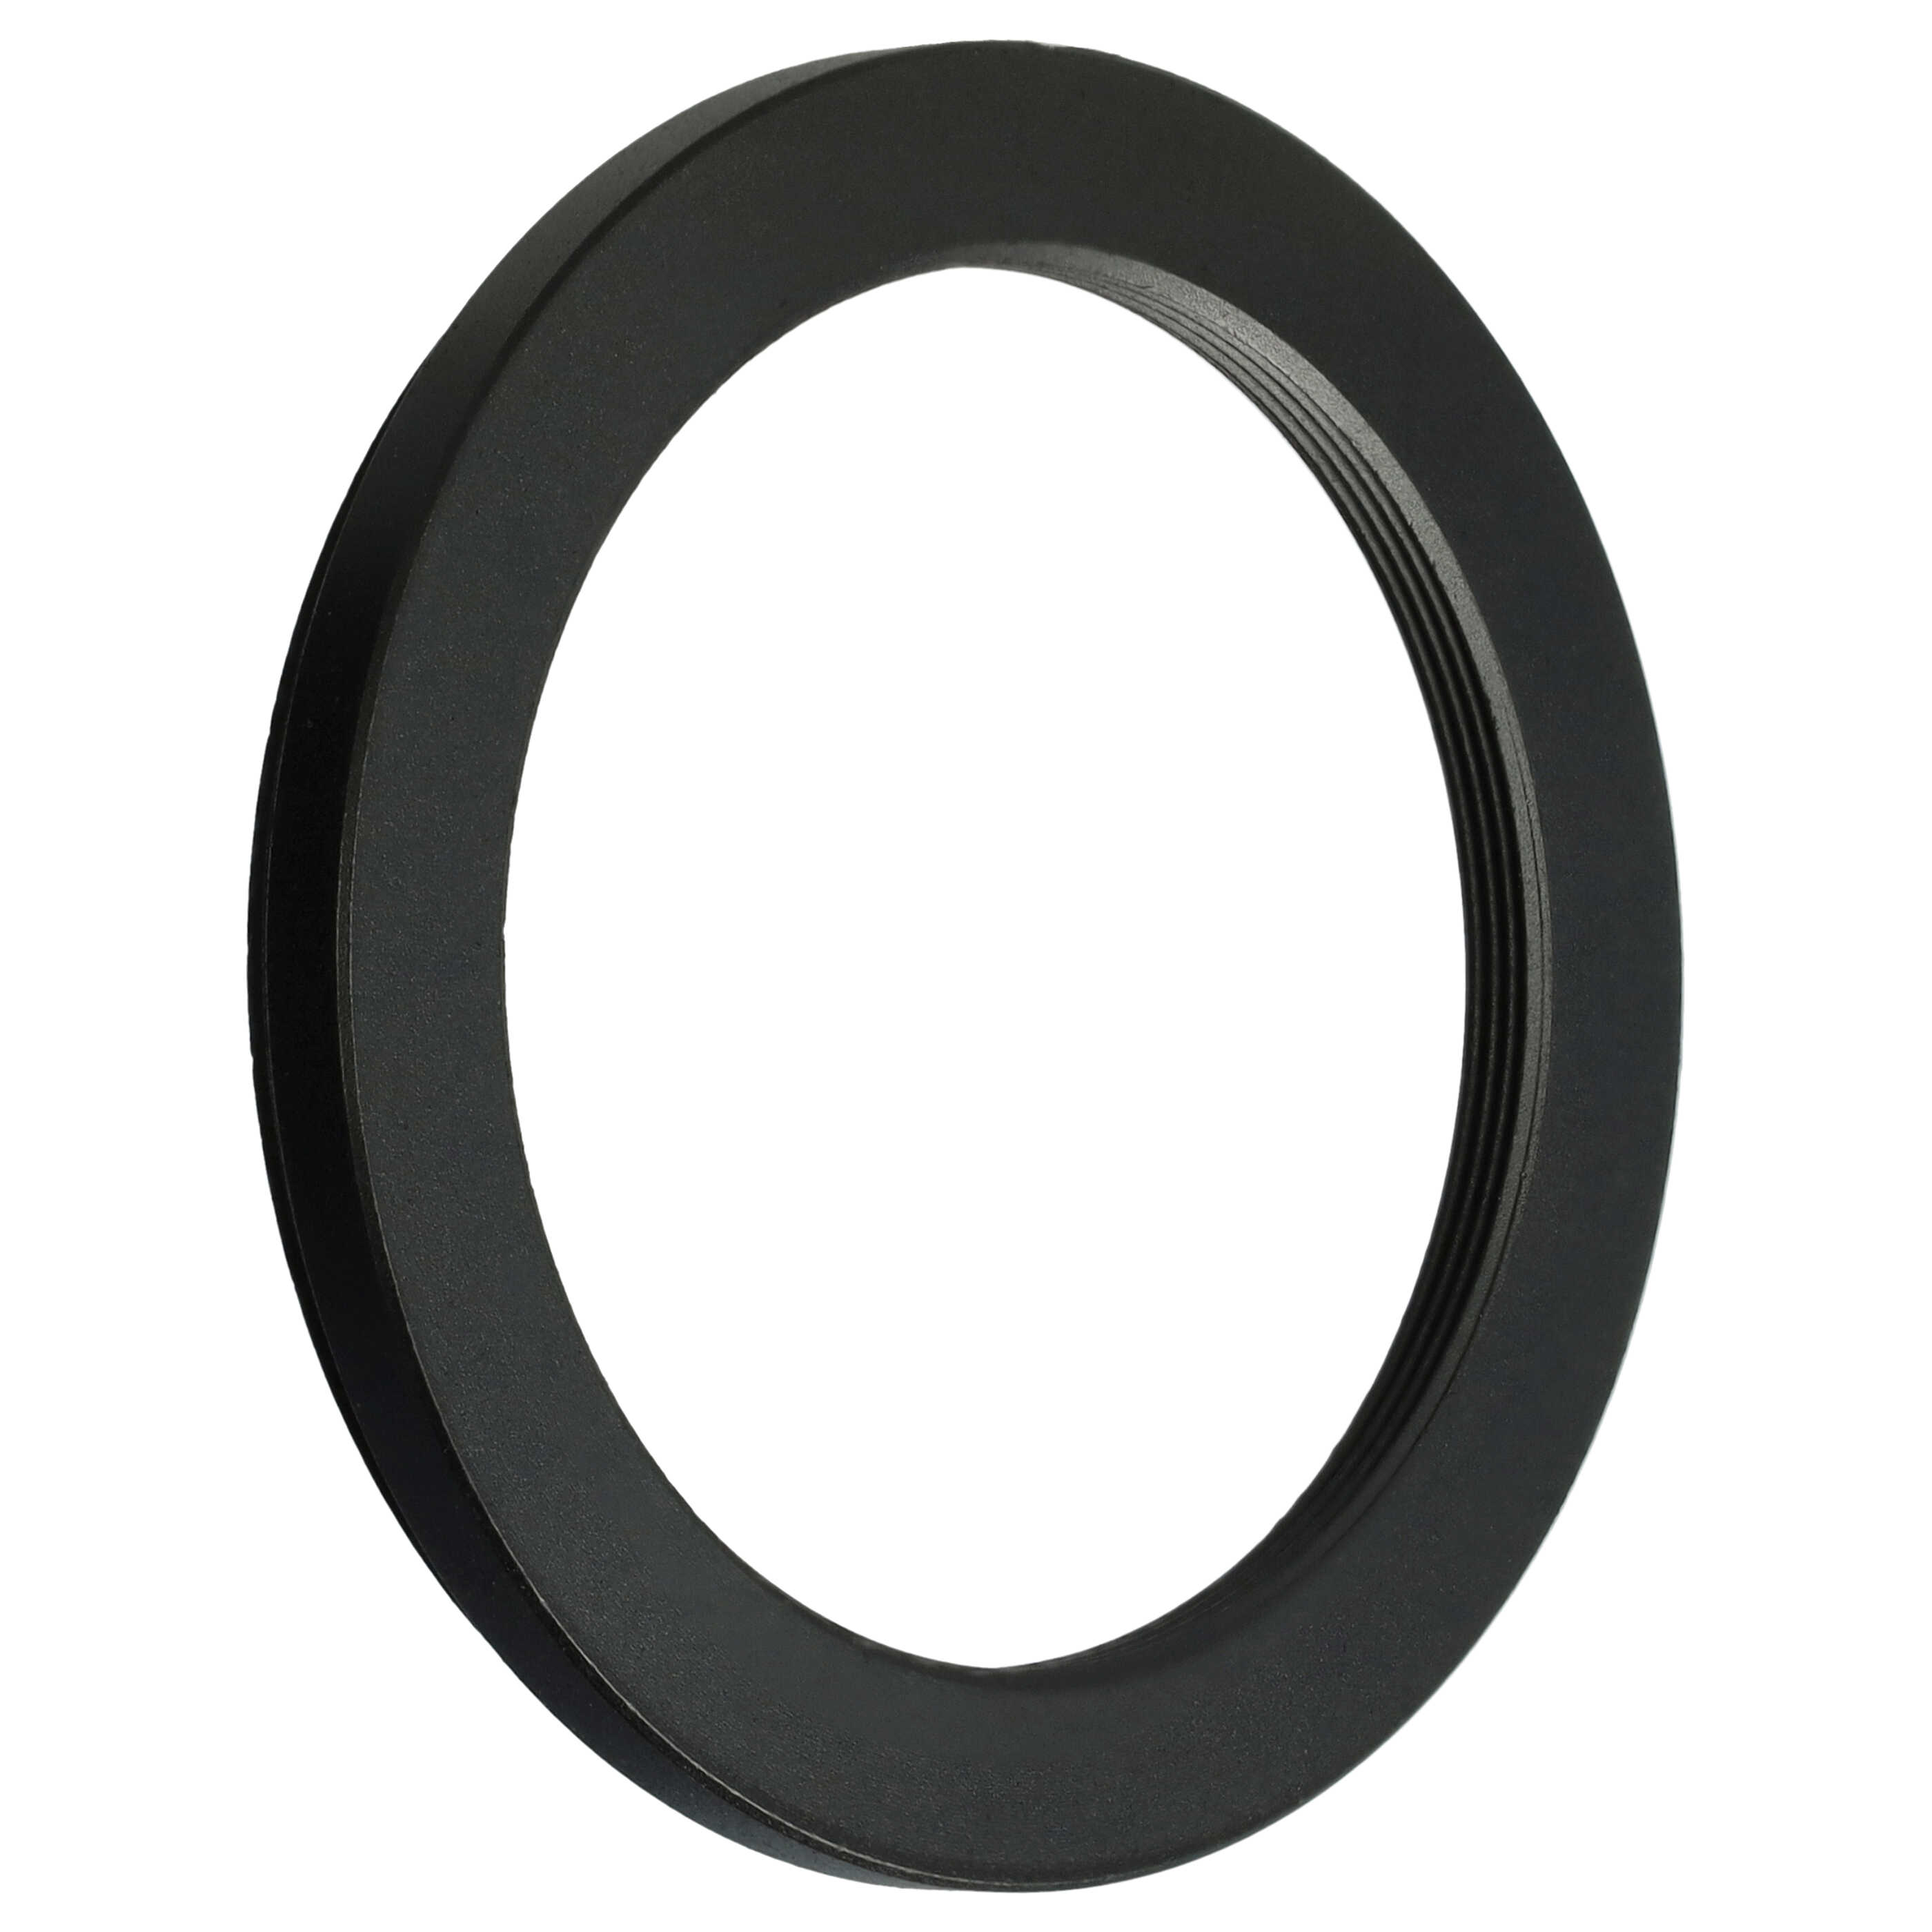 Step-Down Ring Adapter from 52 mm to 42 mm suitable for Camera Lens - Filter Adapter, metal